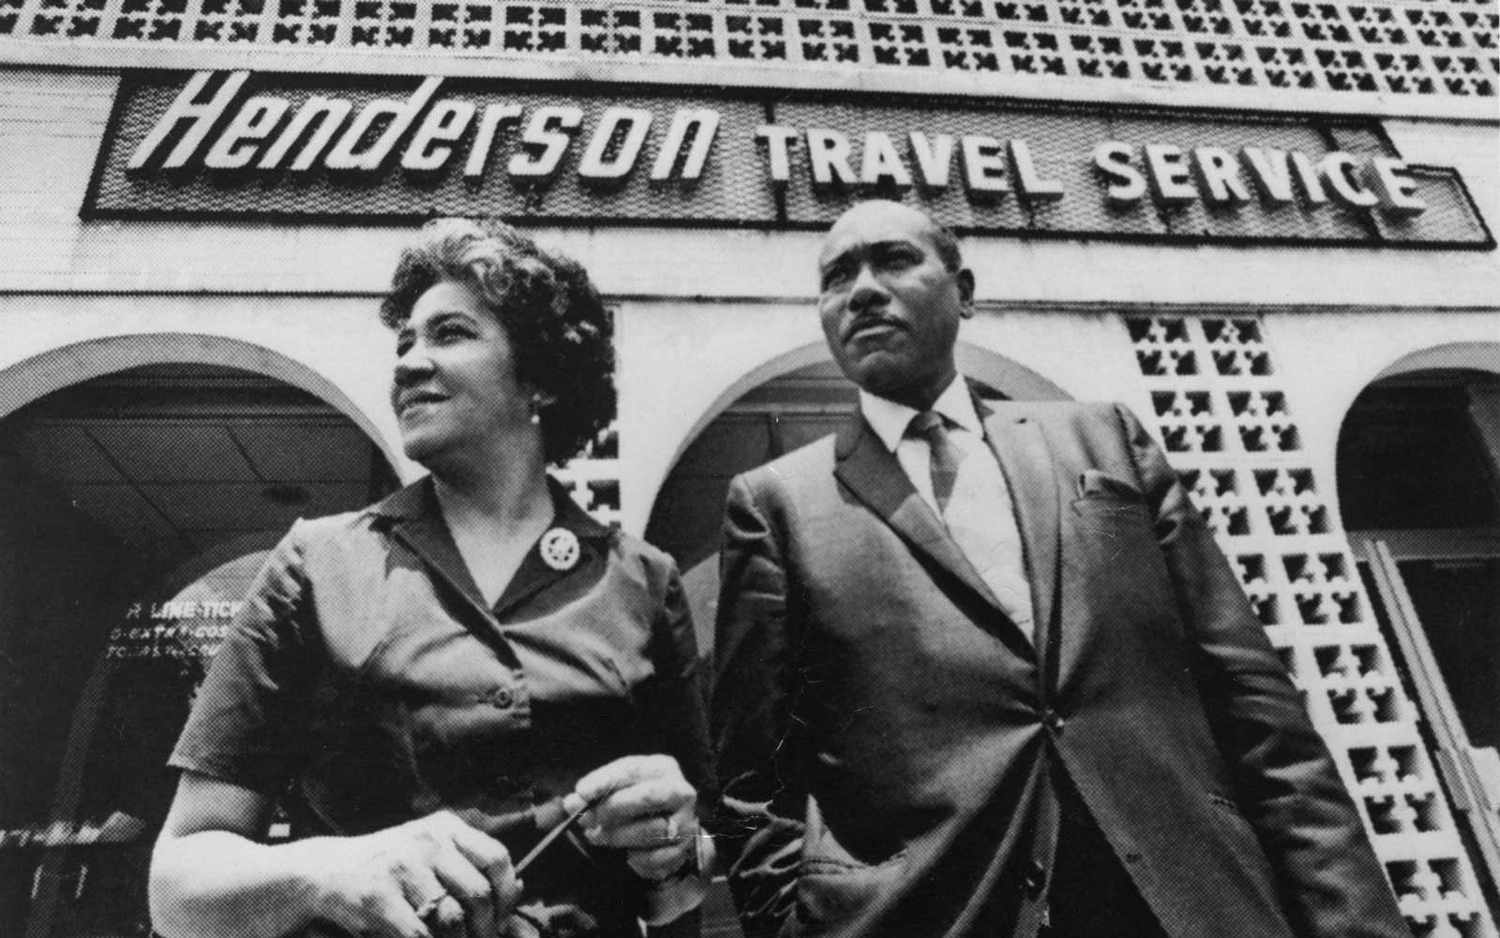 America's First African-American-owned Travel Agency Celebrates 65 Years in the Business